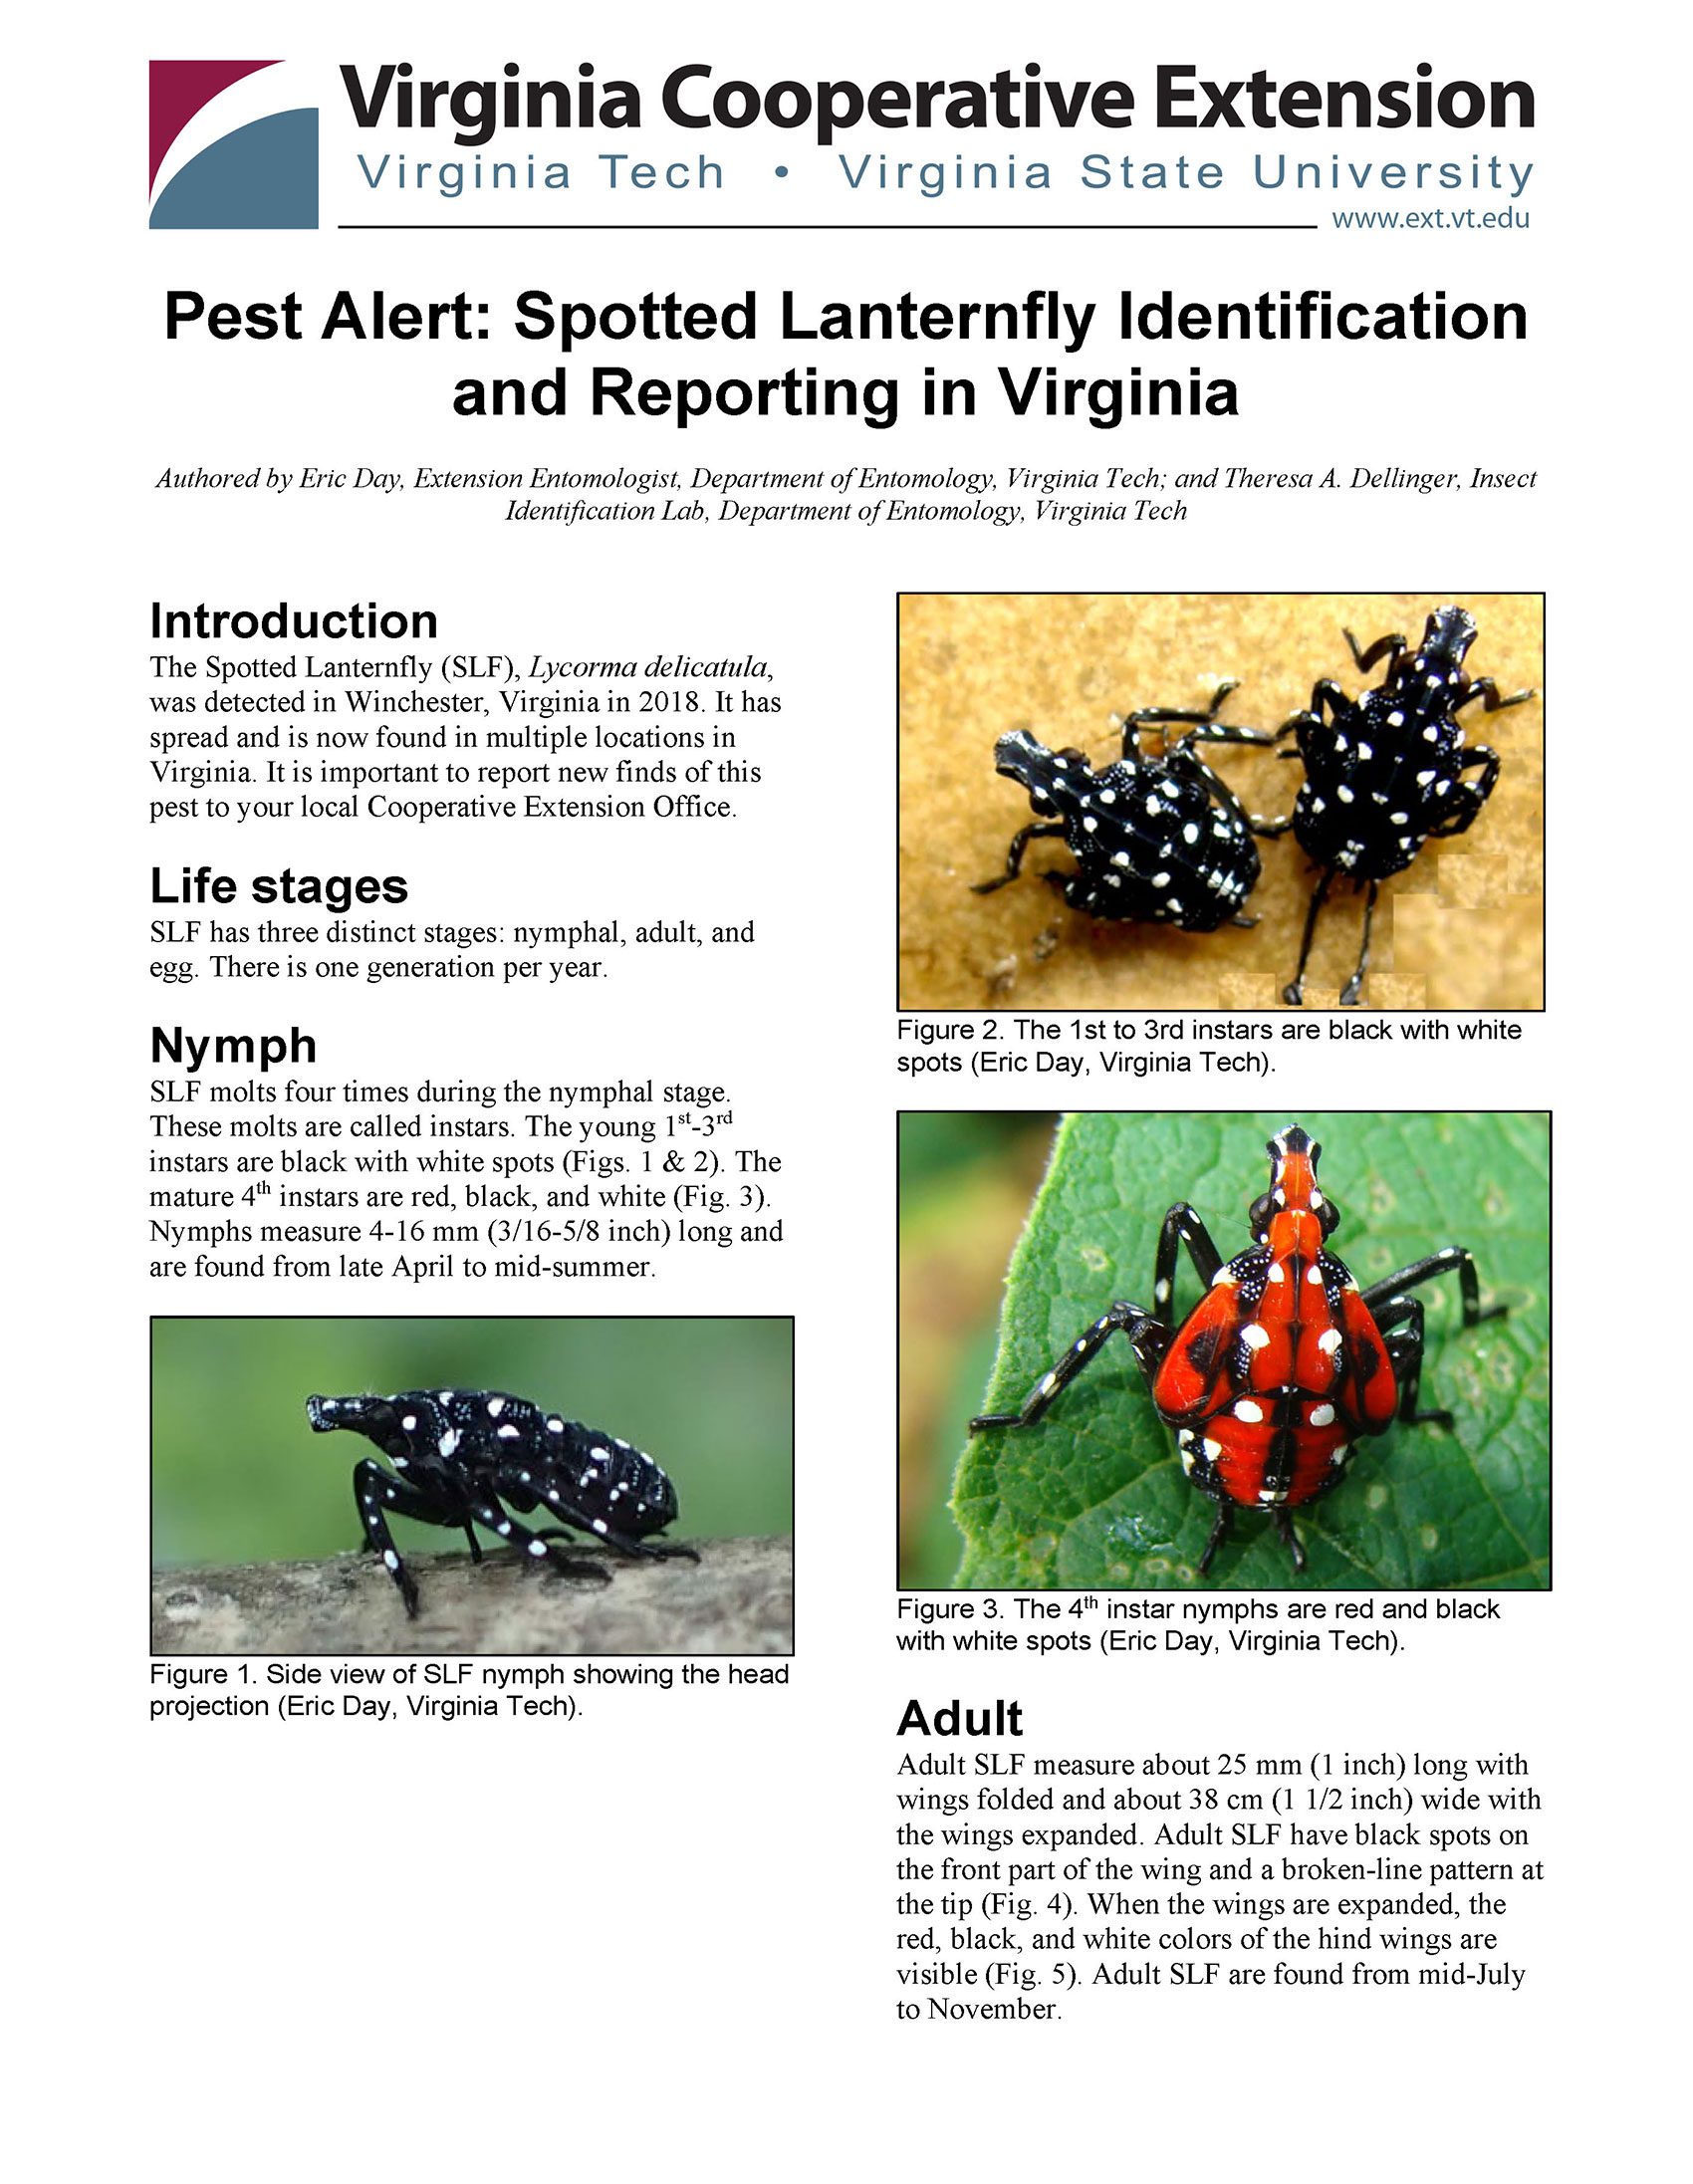 Spotted lantern fly warning